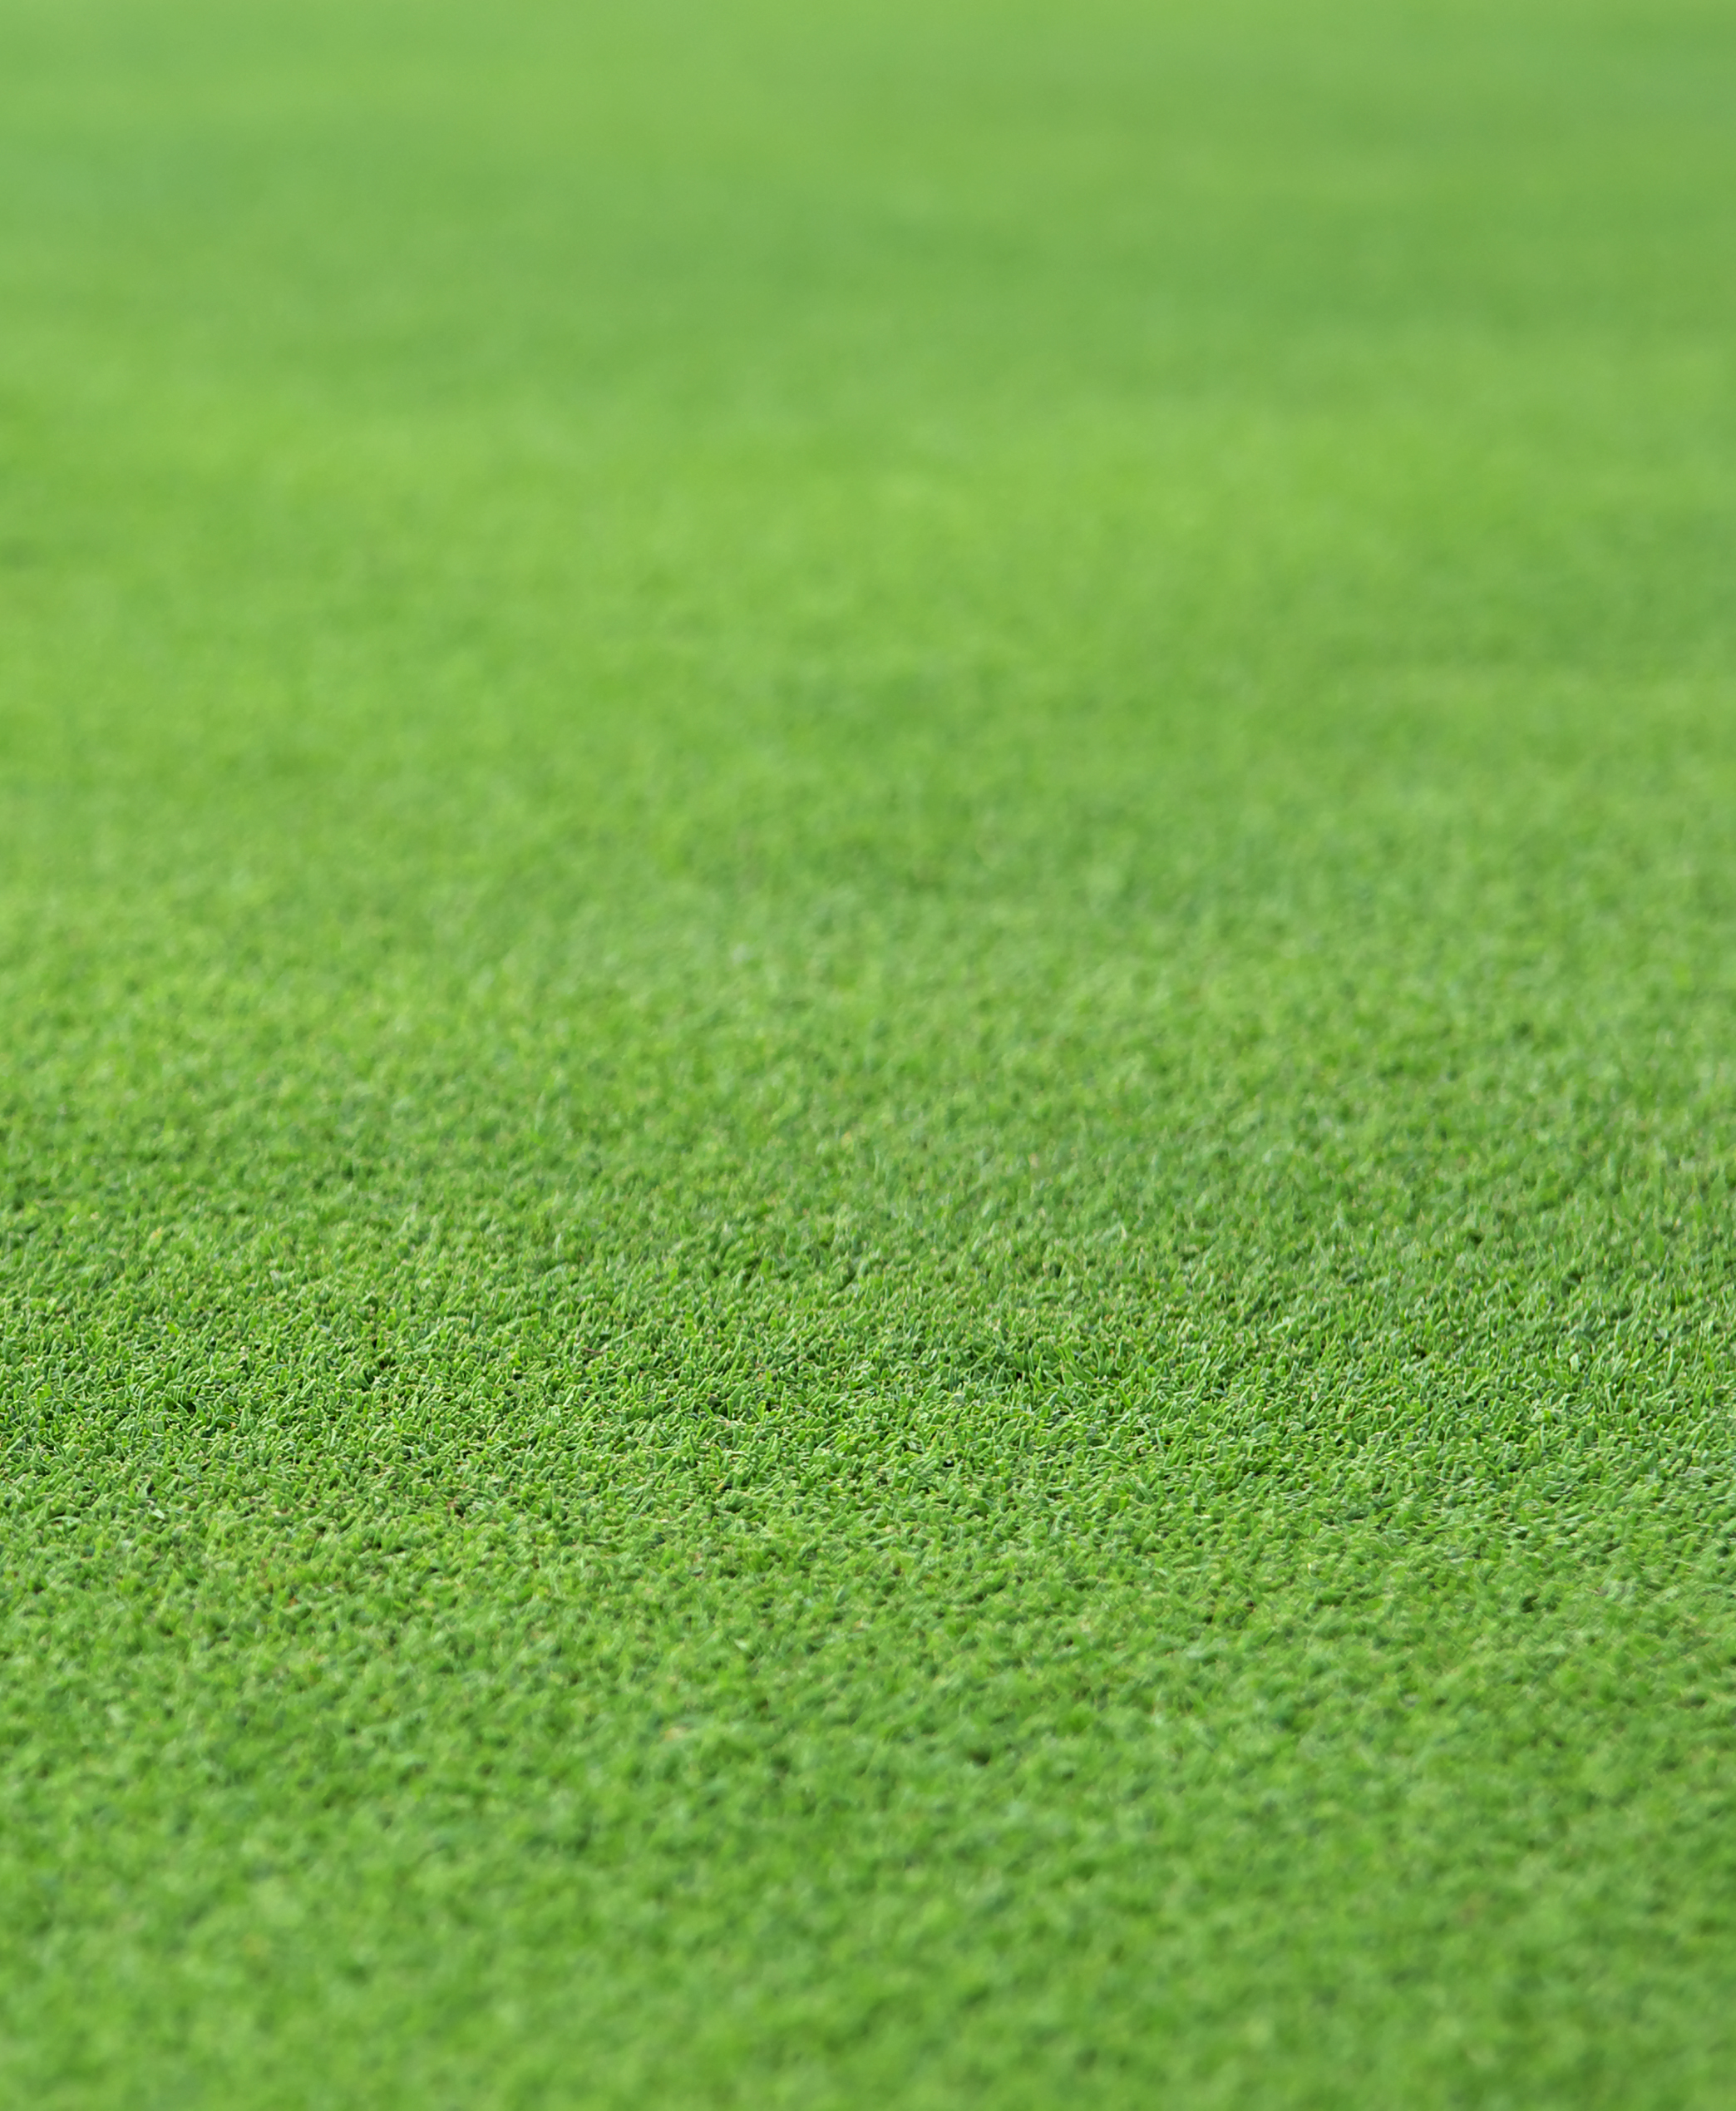 Stock Photo of a Perfect Grass Texture from a Golf Hole